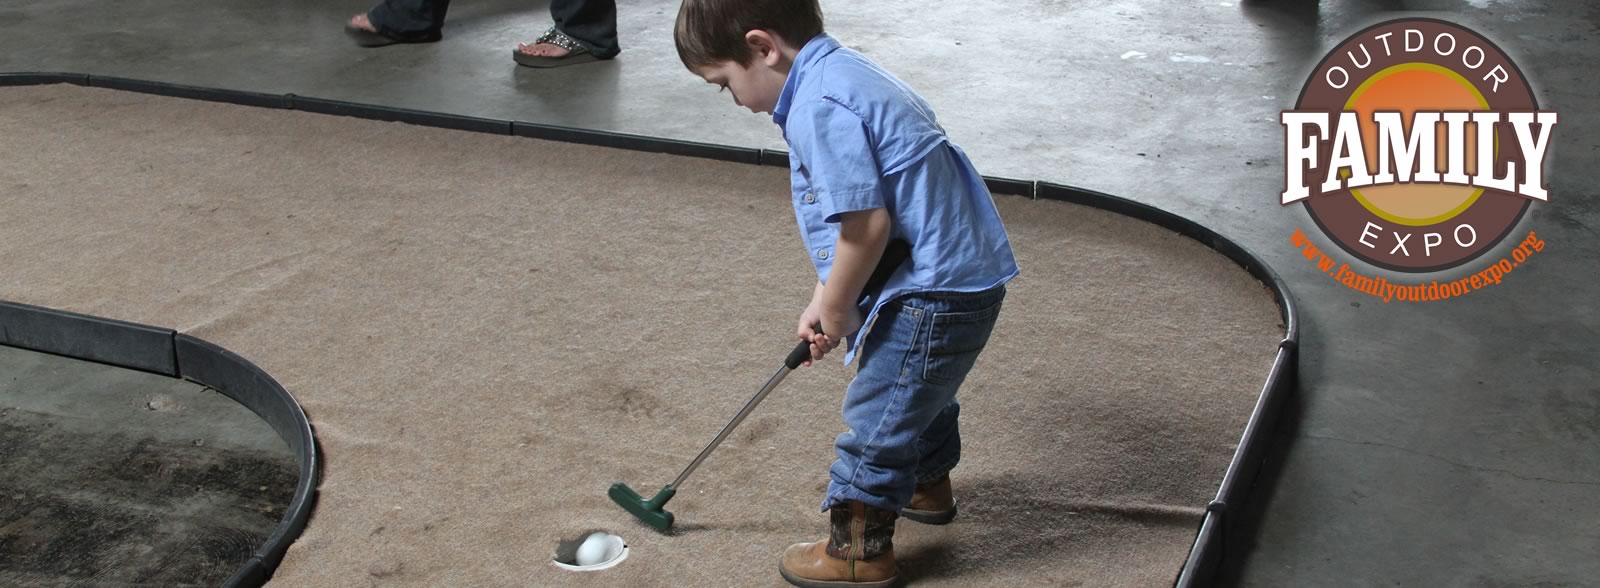 Putt Putt Golf at the Family Outdoor Expo